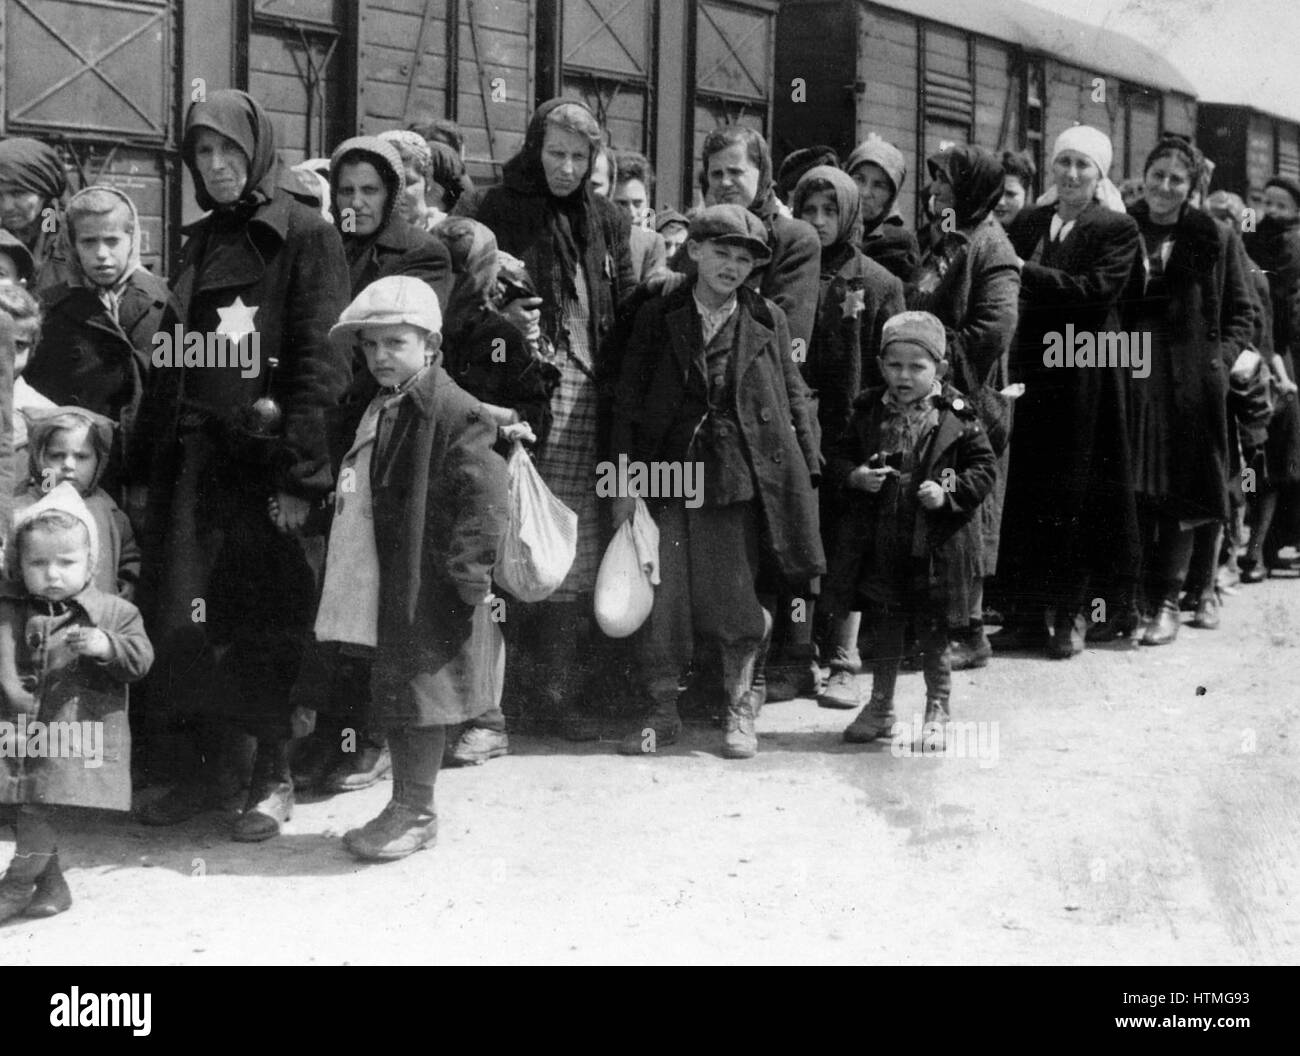 Arrival of a train containing Jews deported to Auschwitz death camp in Poland. Auschwitz-Birkenau (1940-1945) was the largest of the German Concentration and Extermination camps. 1.1 million people, 90 per cent of them Jews are thought to have died there Stock Photo